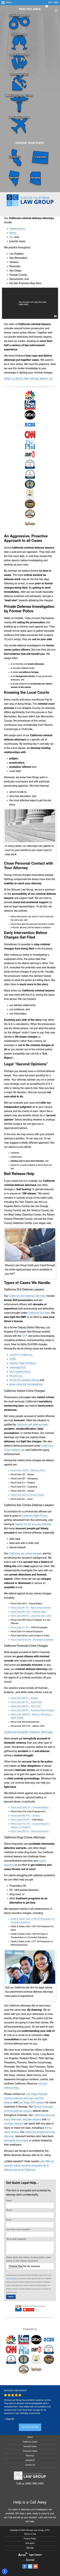 Shouse Law Group - San Francisco CA Lawyers